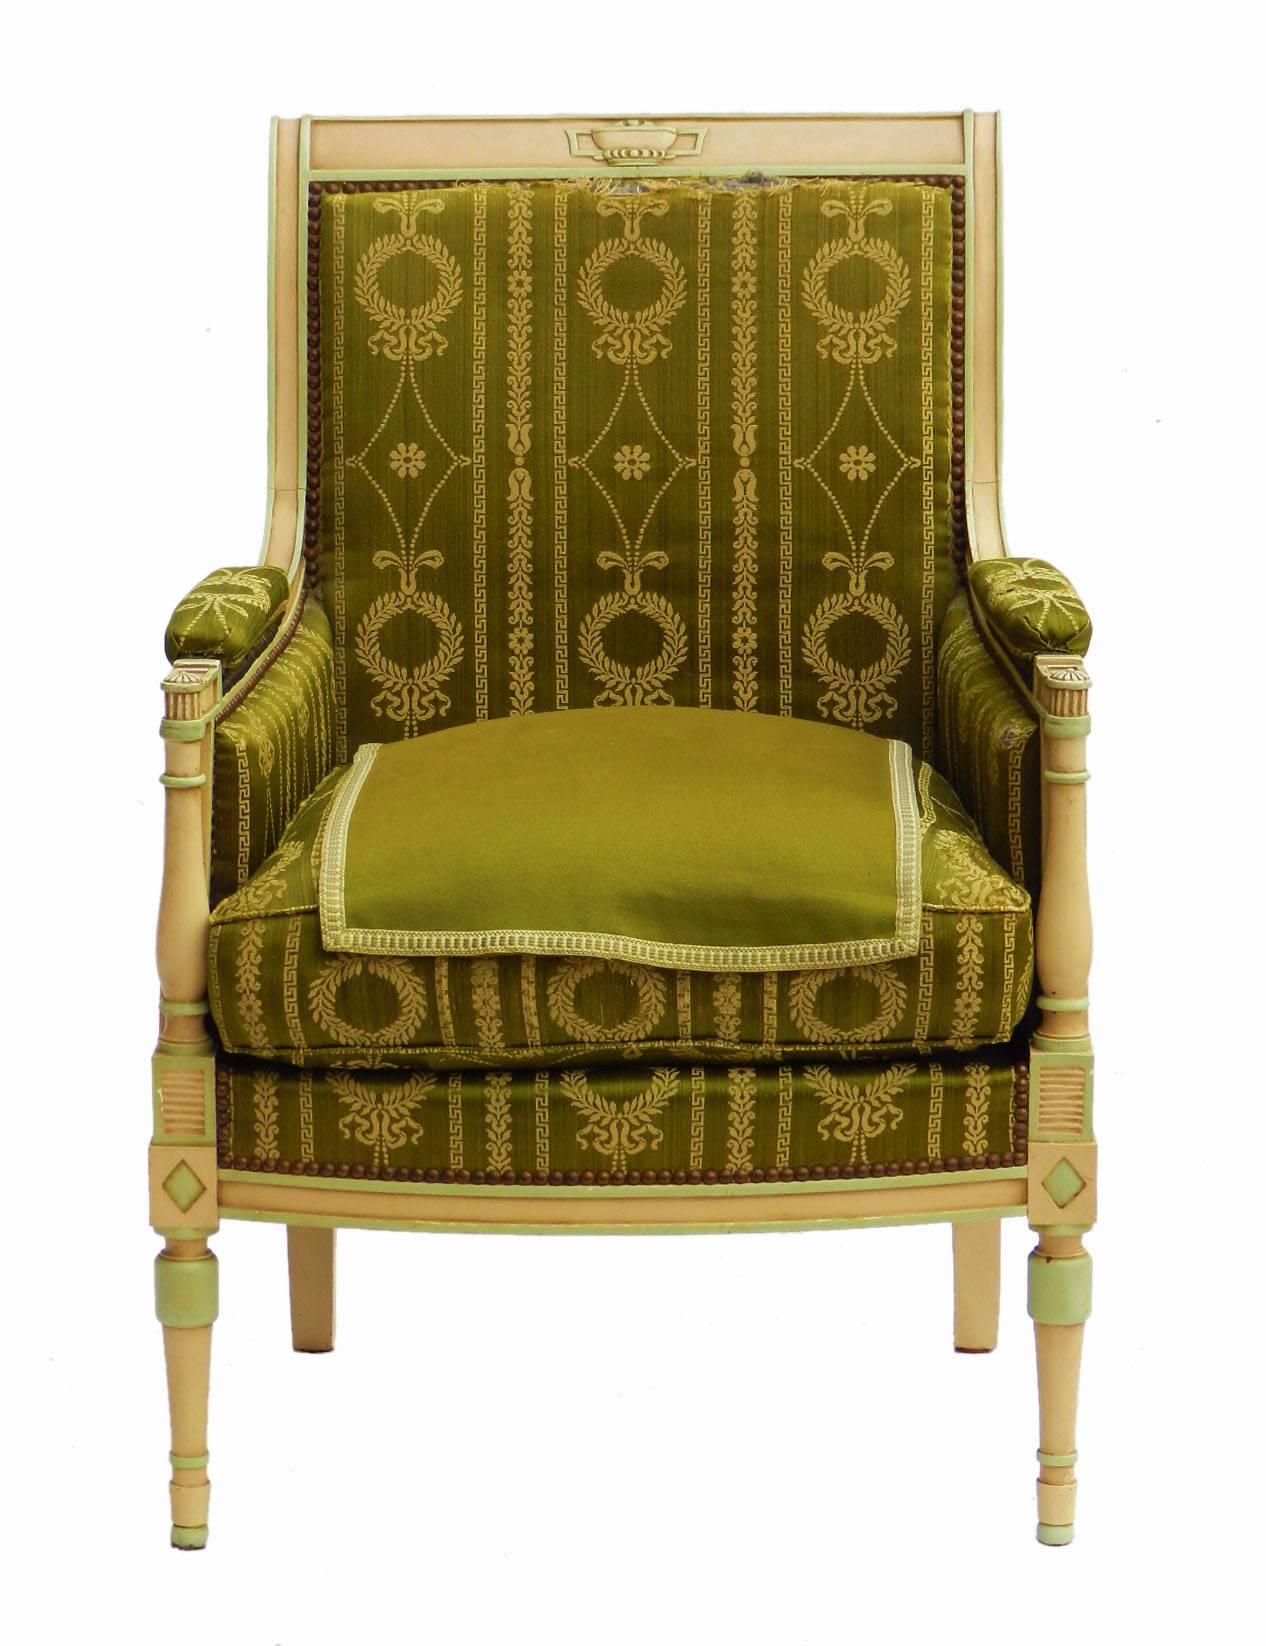 Empire Revival Empire revival Bergere Armchair includes recovering Original Early 20th Century